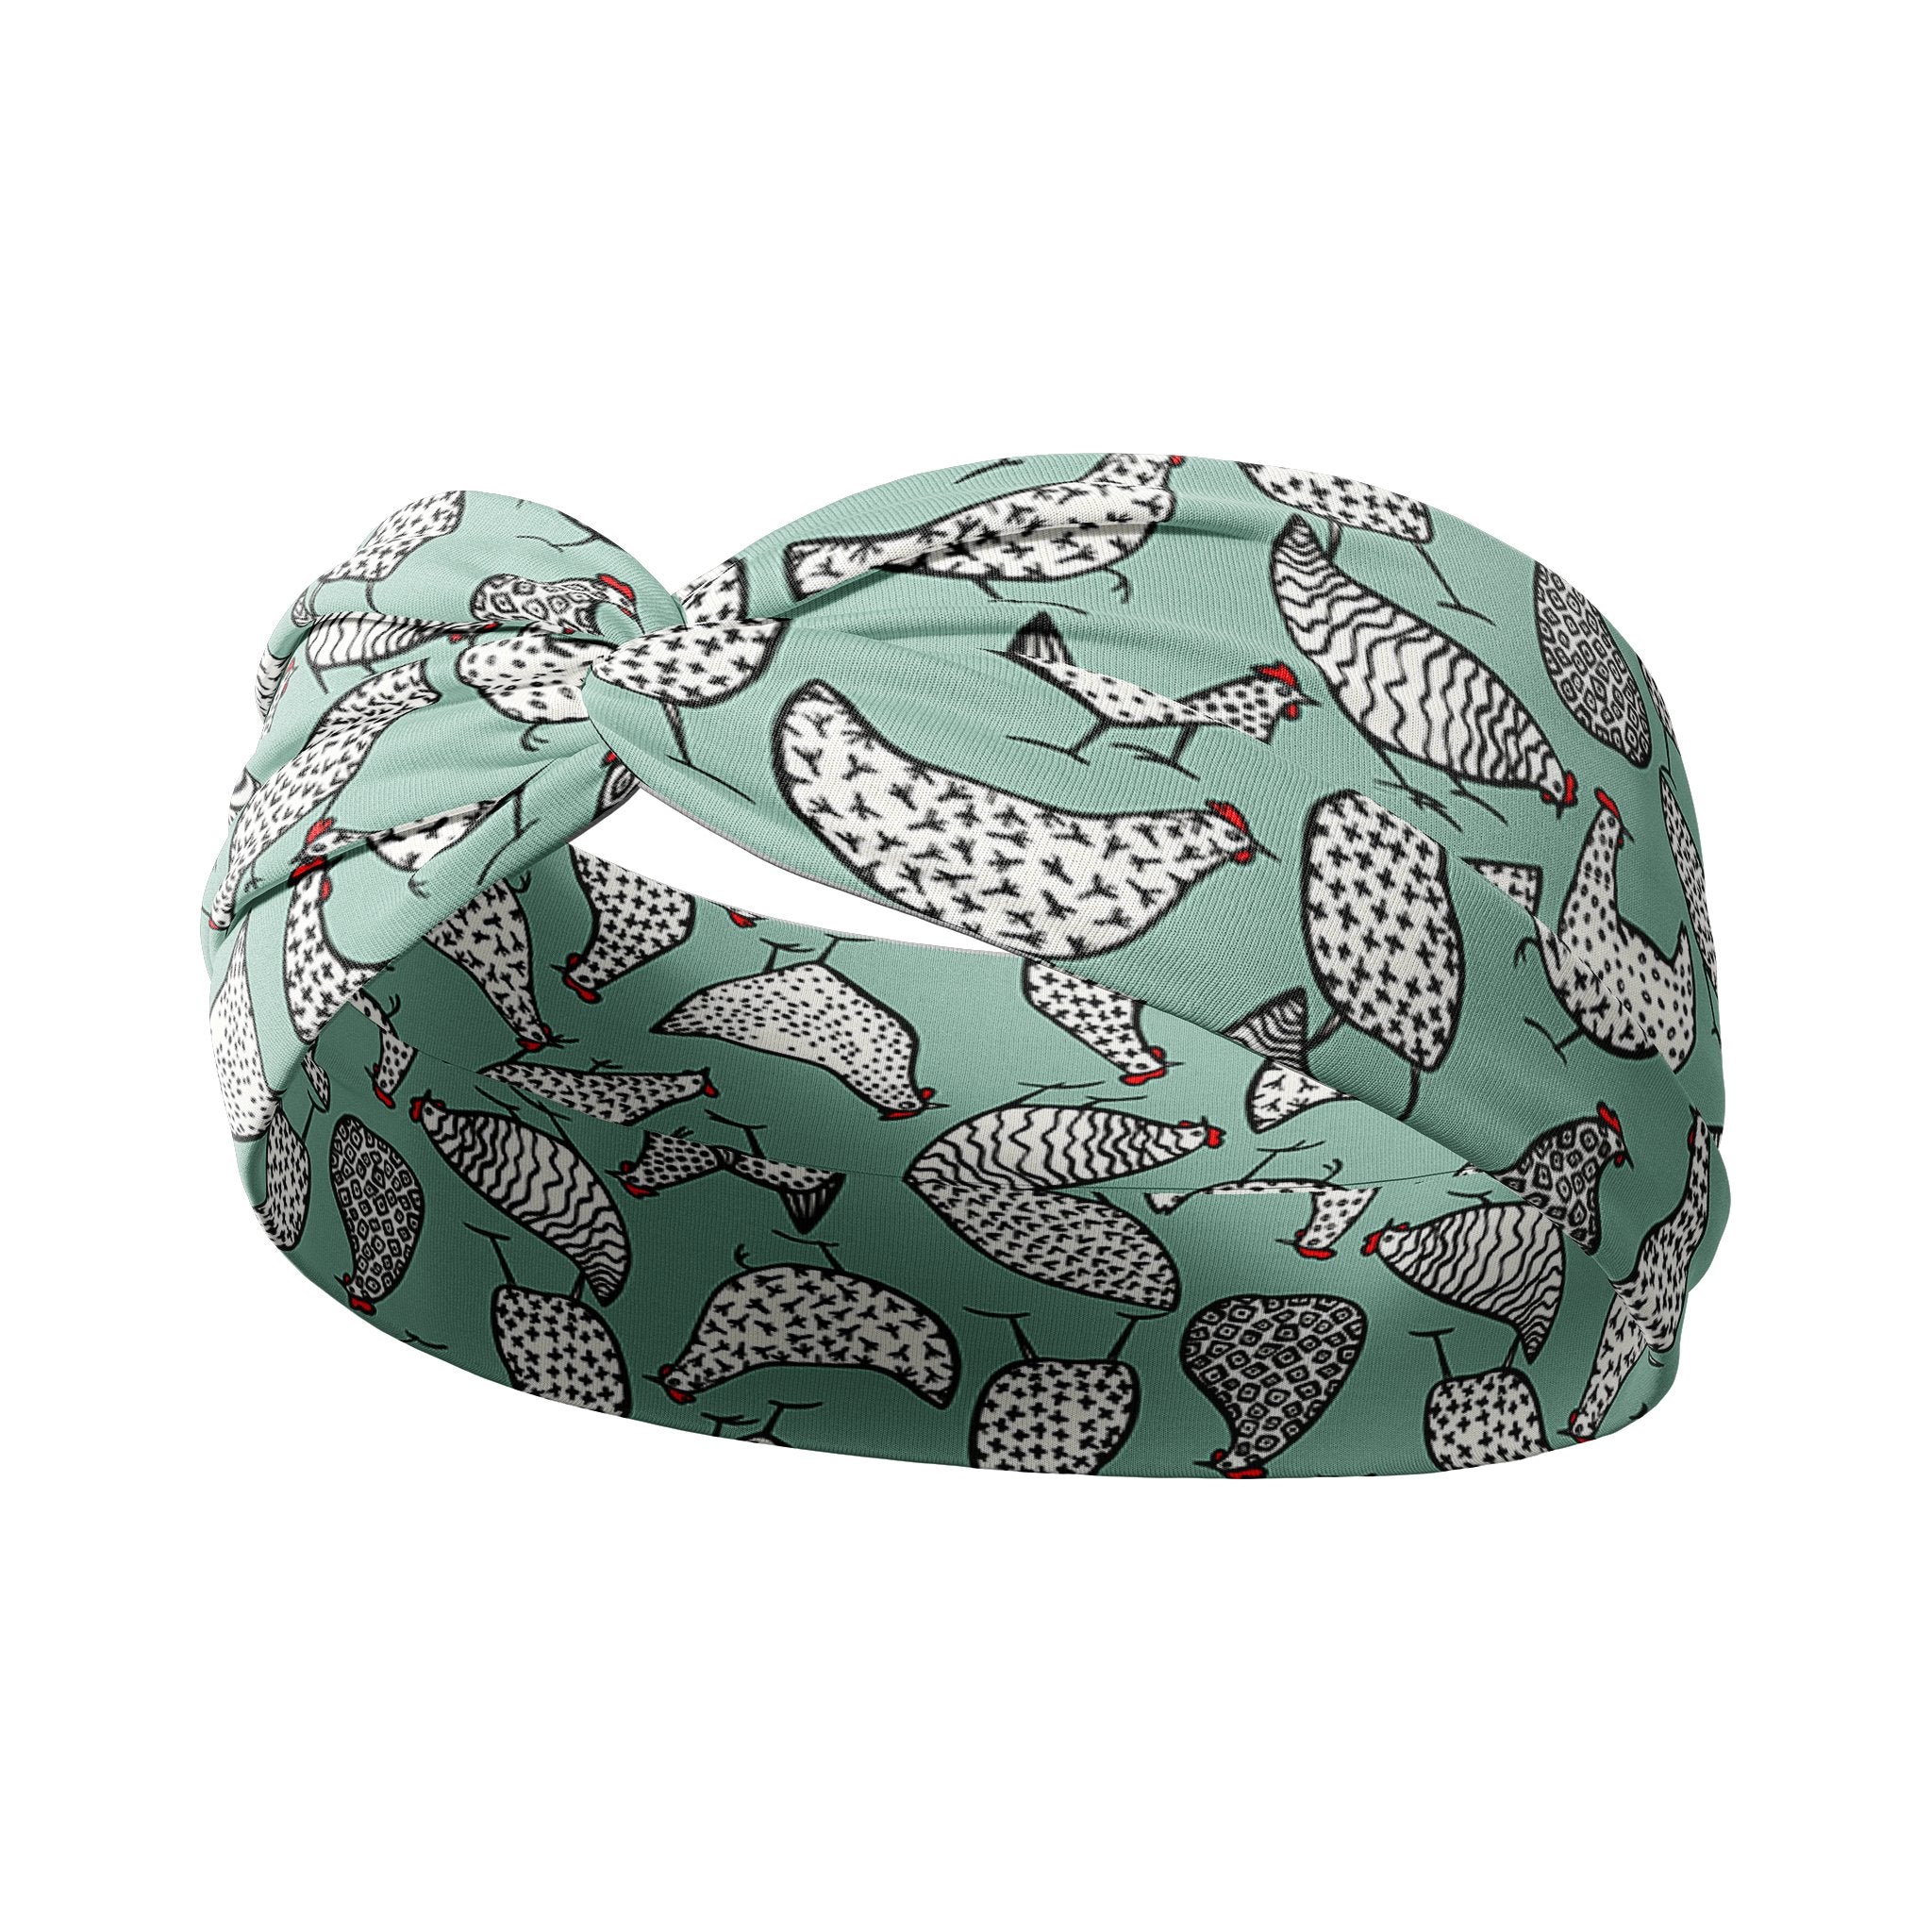 Adult women's light teal headband with allover black and white cartoon chicken print